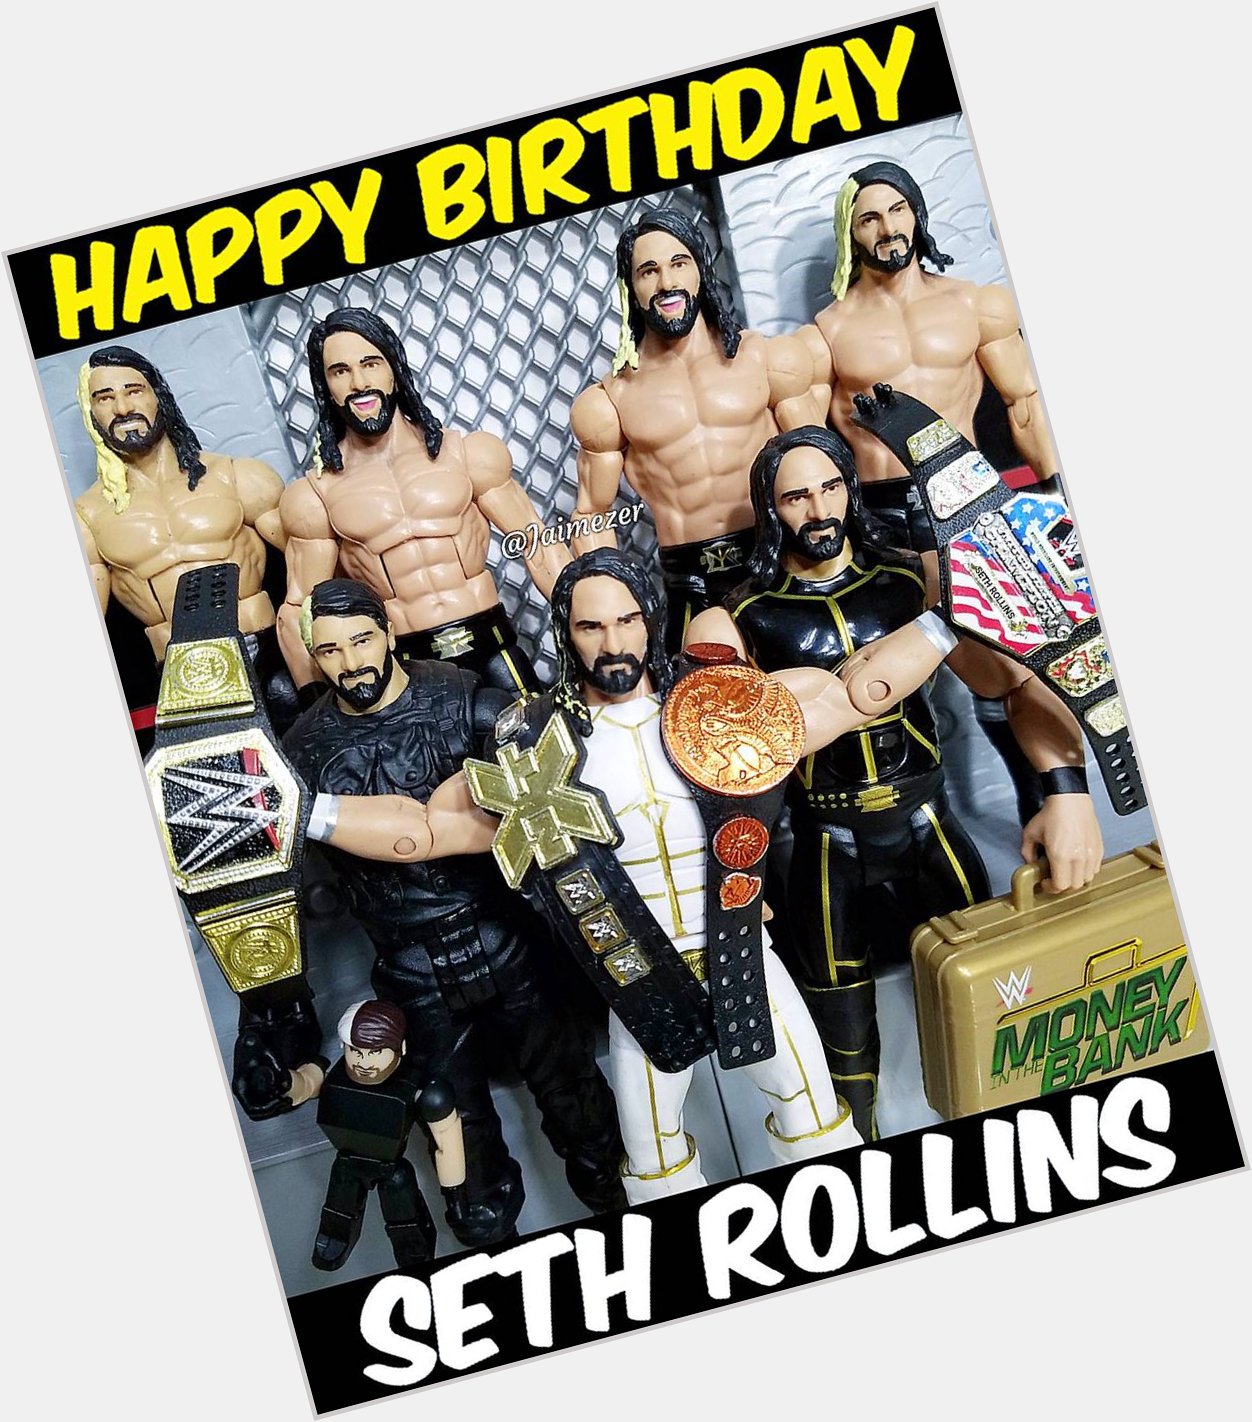 Happy Birthday to one of my favorite wrestlers today, SETH ROLLINS!  